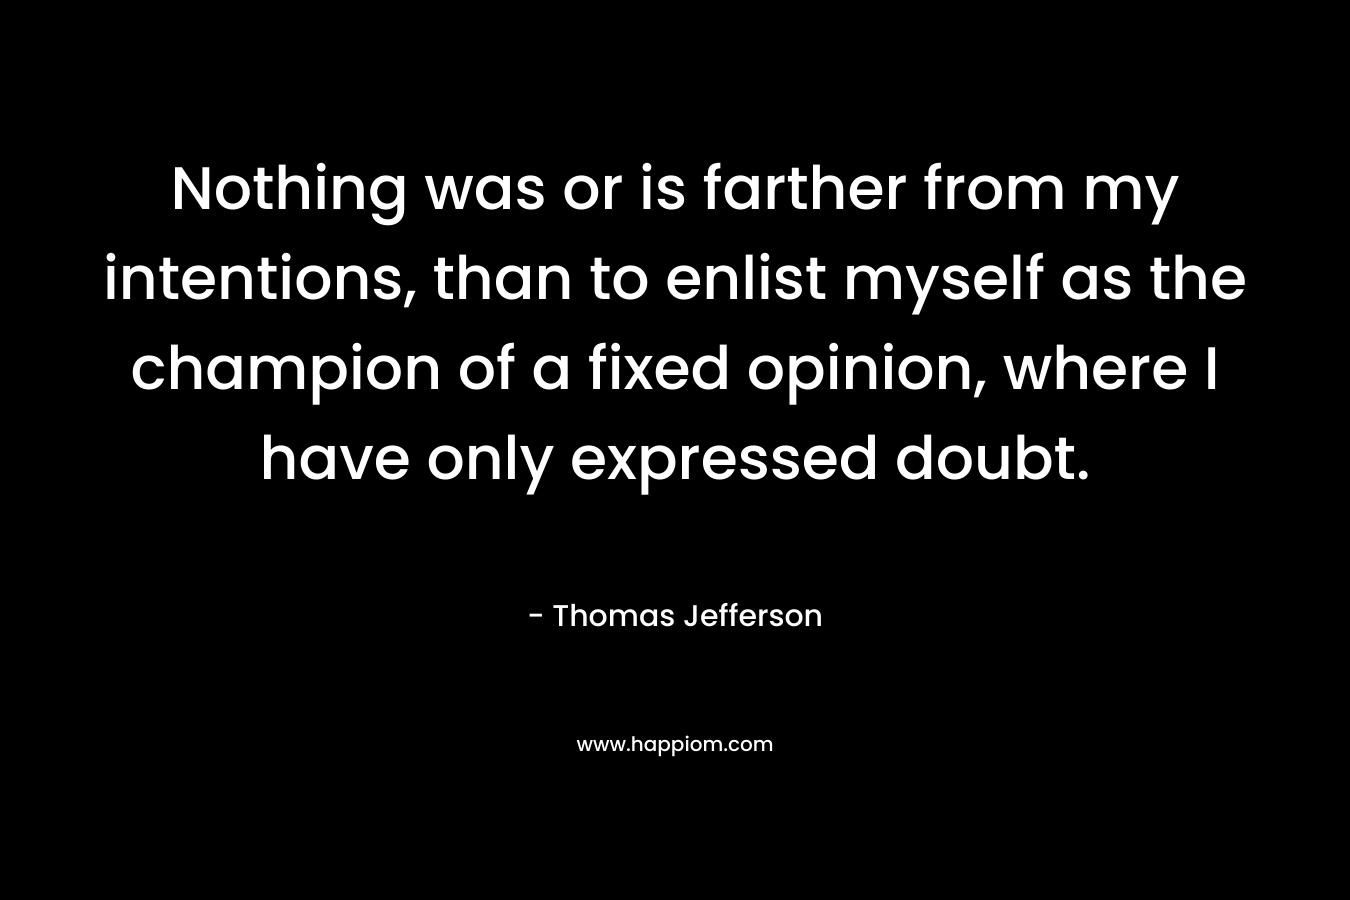 Nothing was or is farther from my intentions, than to enlist myself as the champion of a fixed opinion, where I have only expressed doubt. – Thomas Jefferson